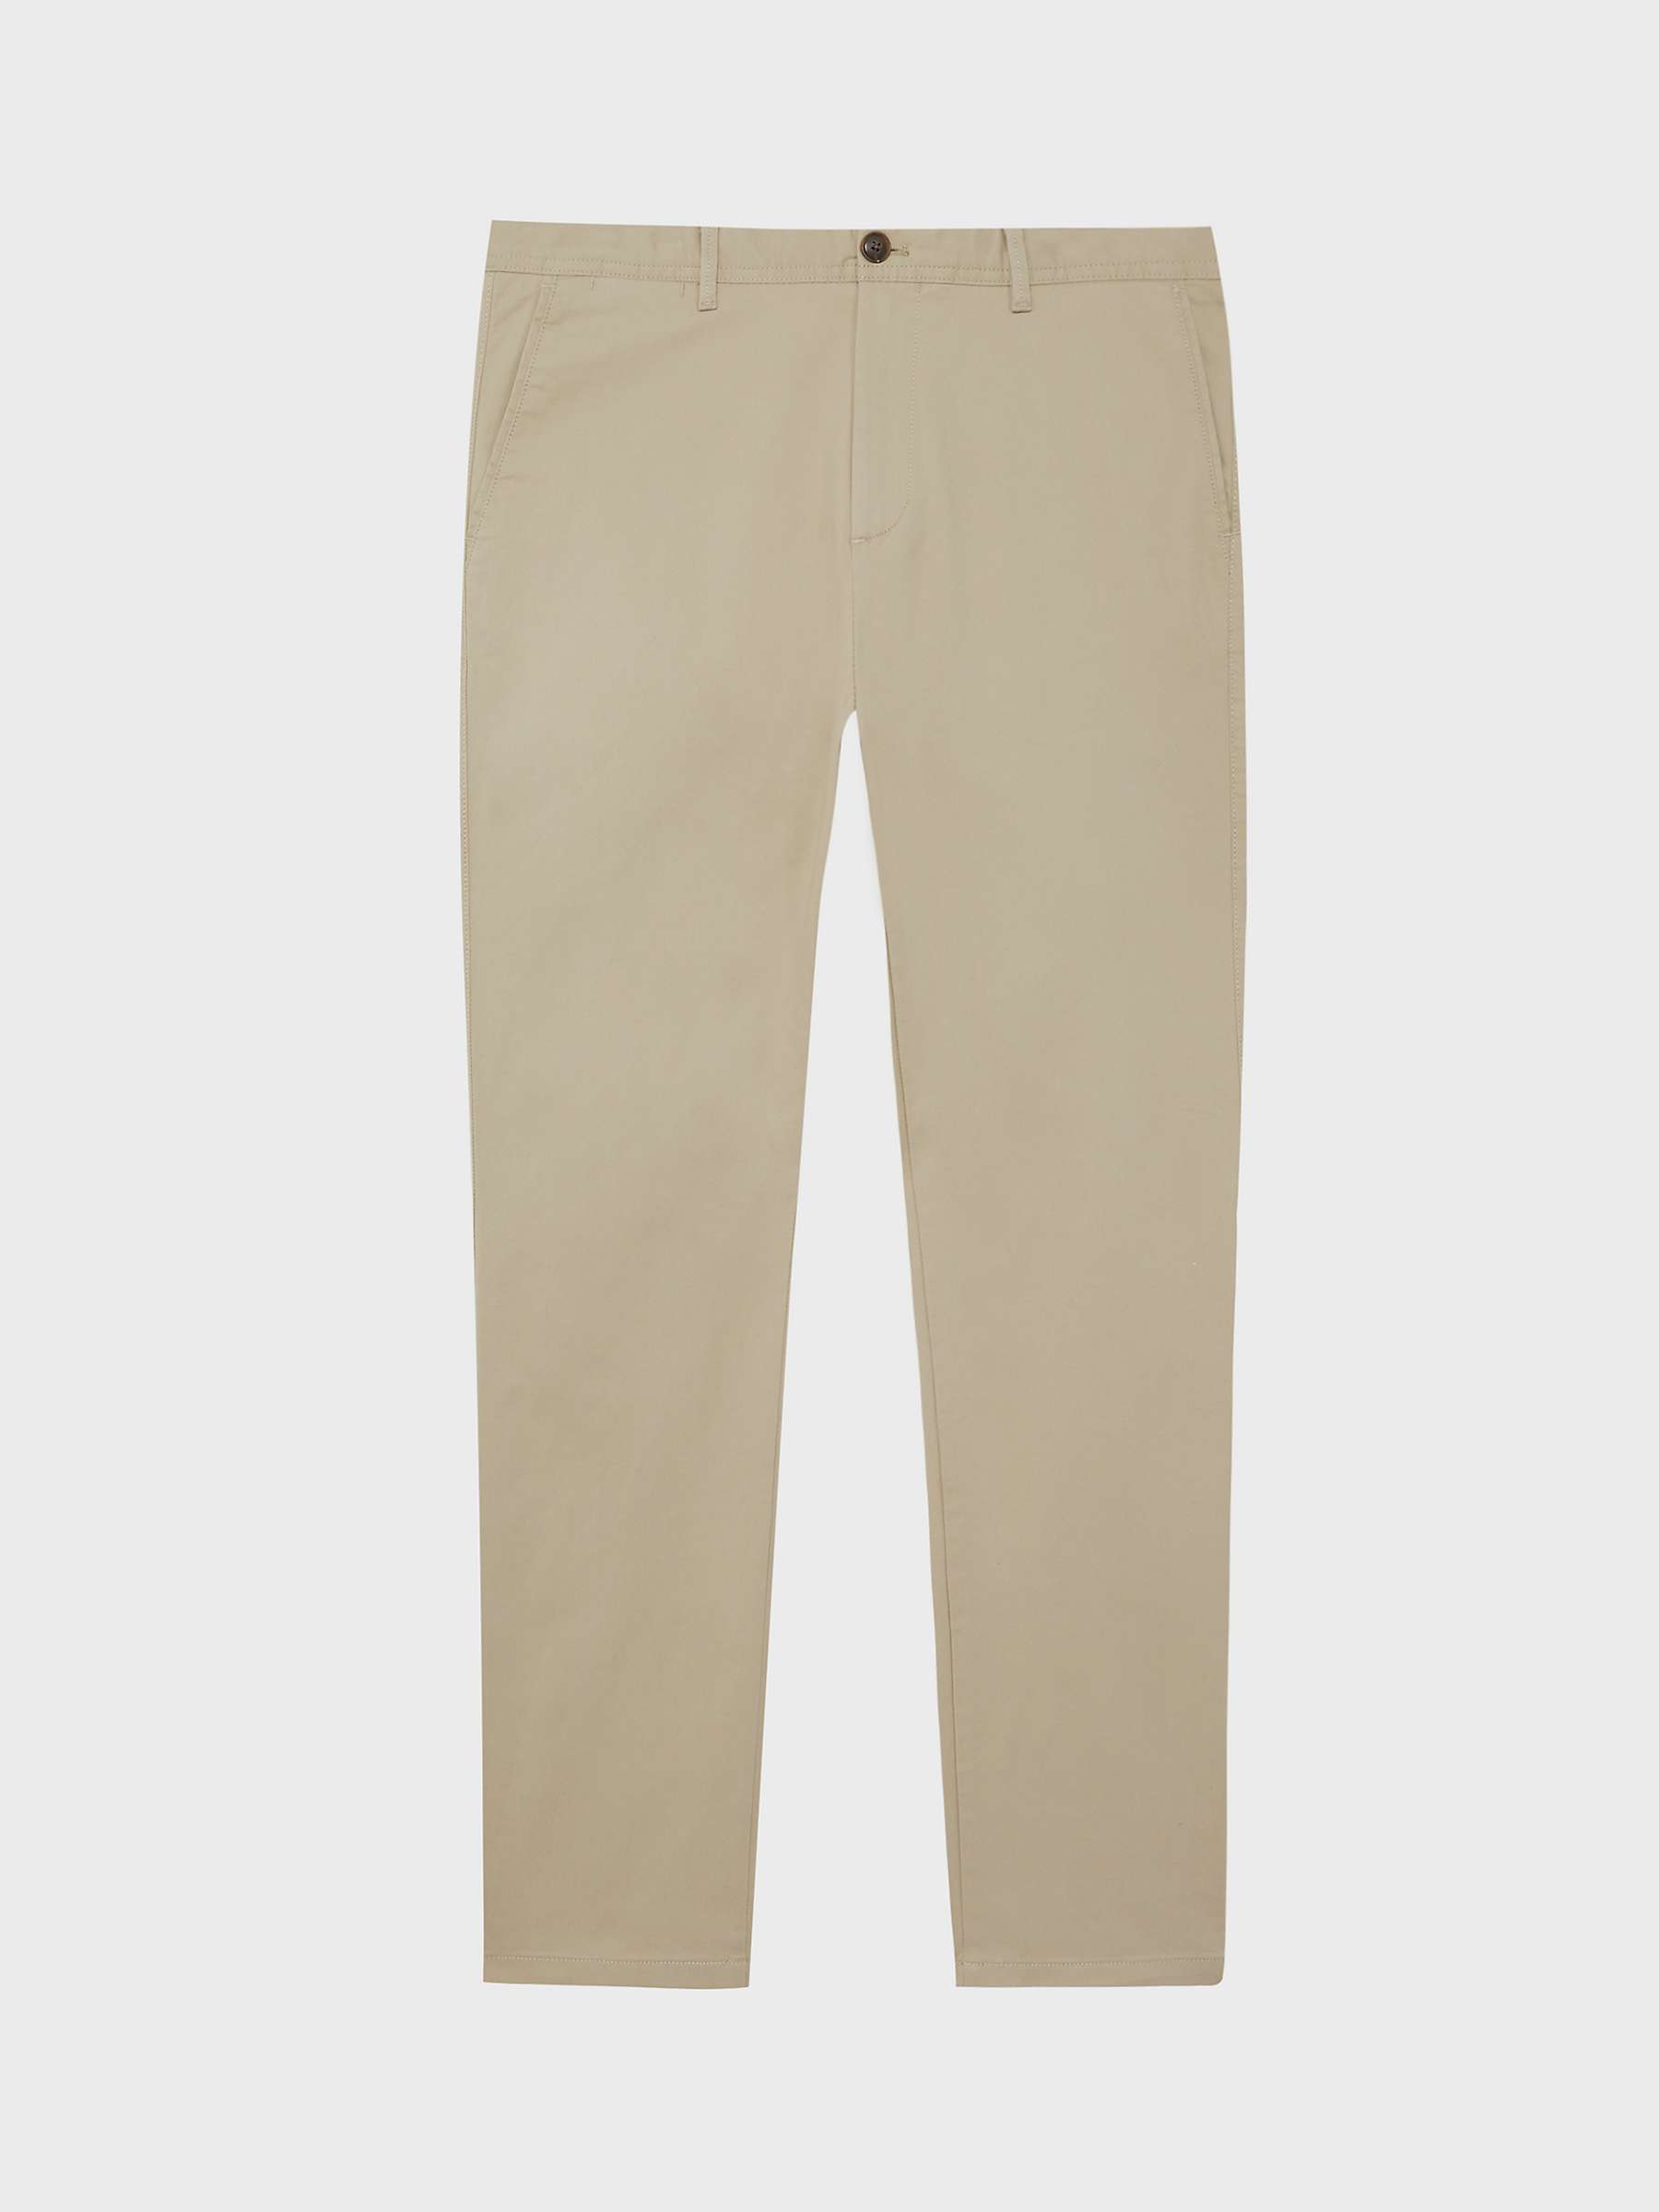 Buy Reiss Pitch Slim Fit Stretch Cotton Chino Trousers Online at johnlewis.com